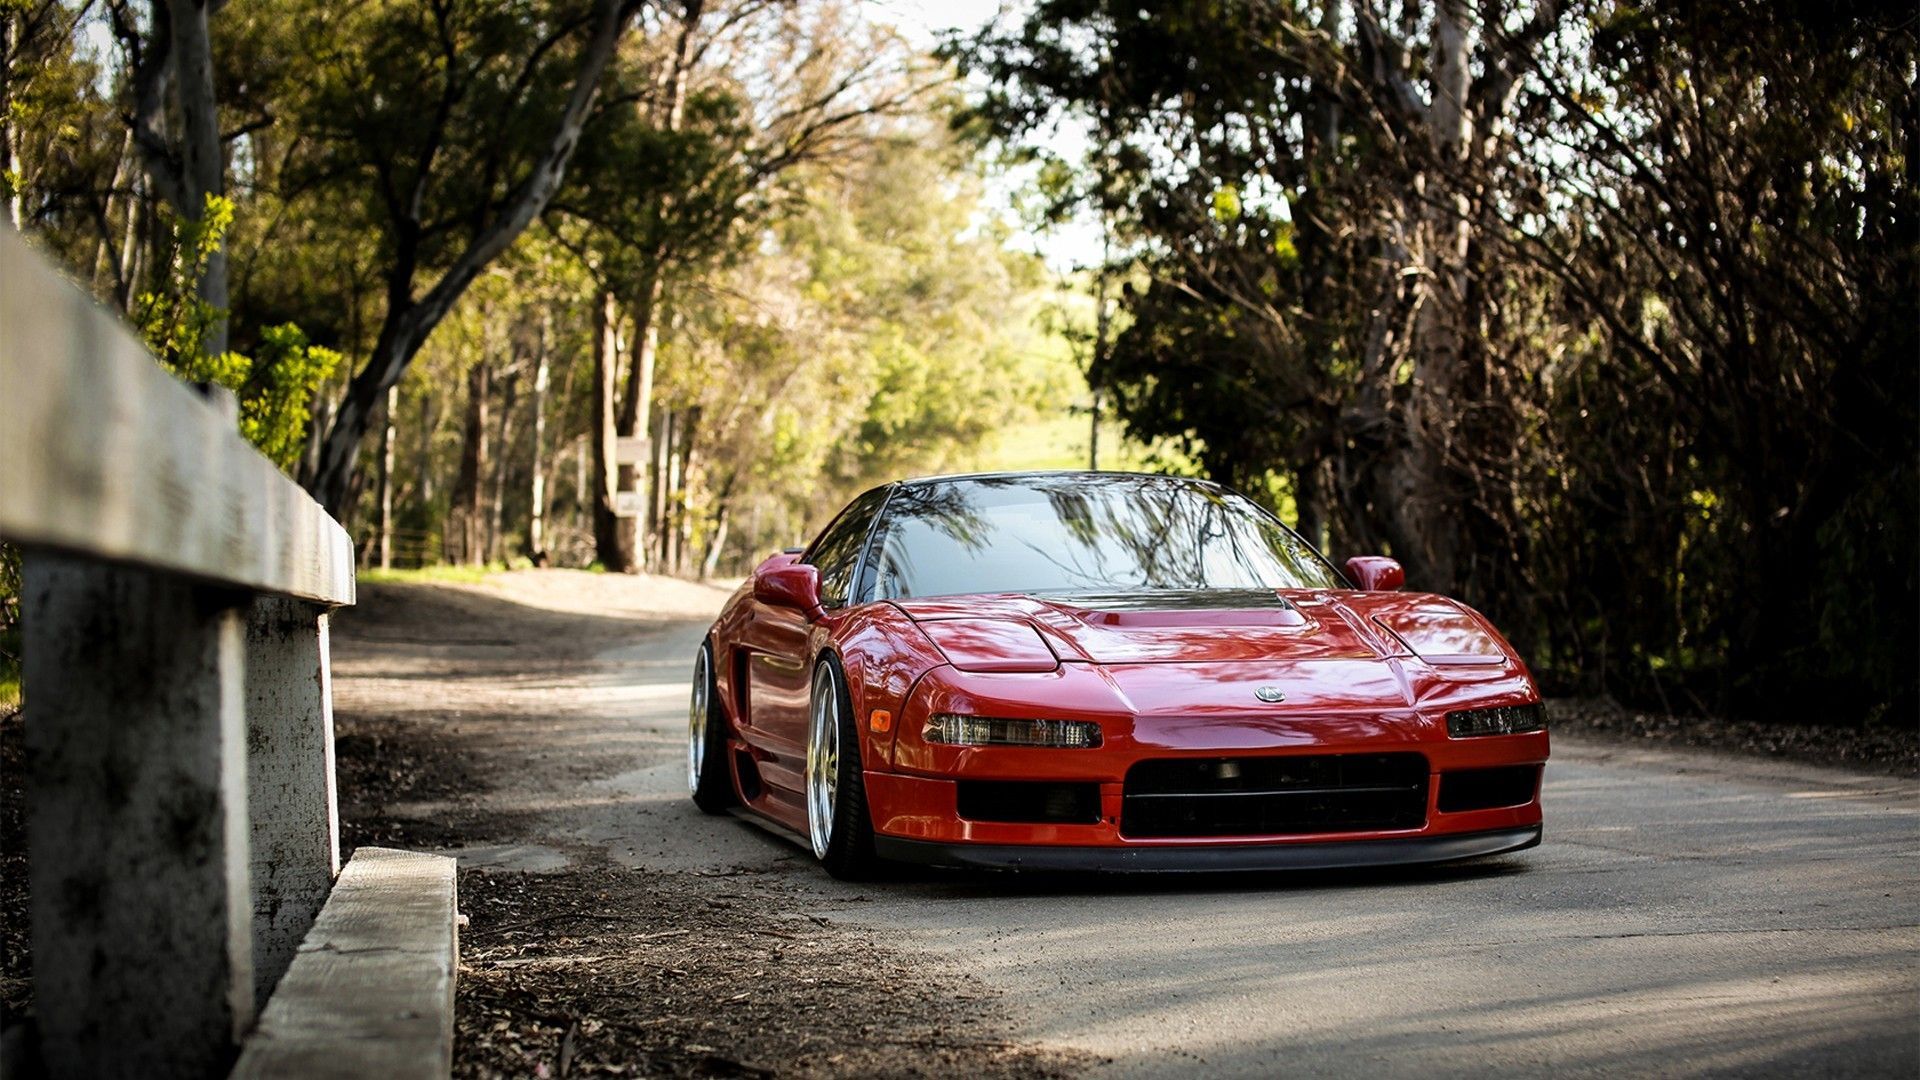 A red sports car driving down the road - JDM